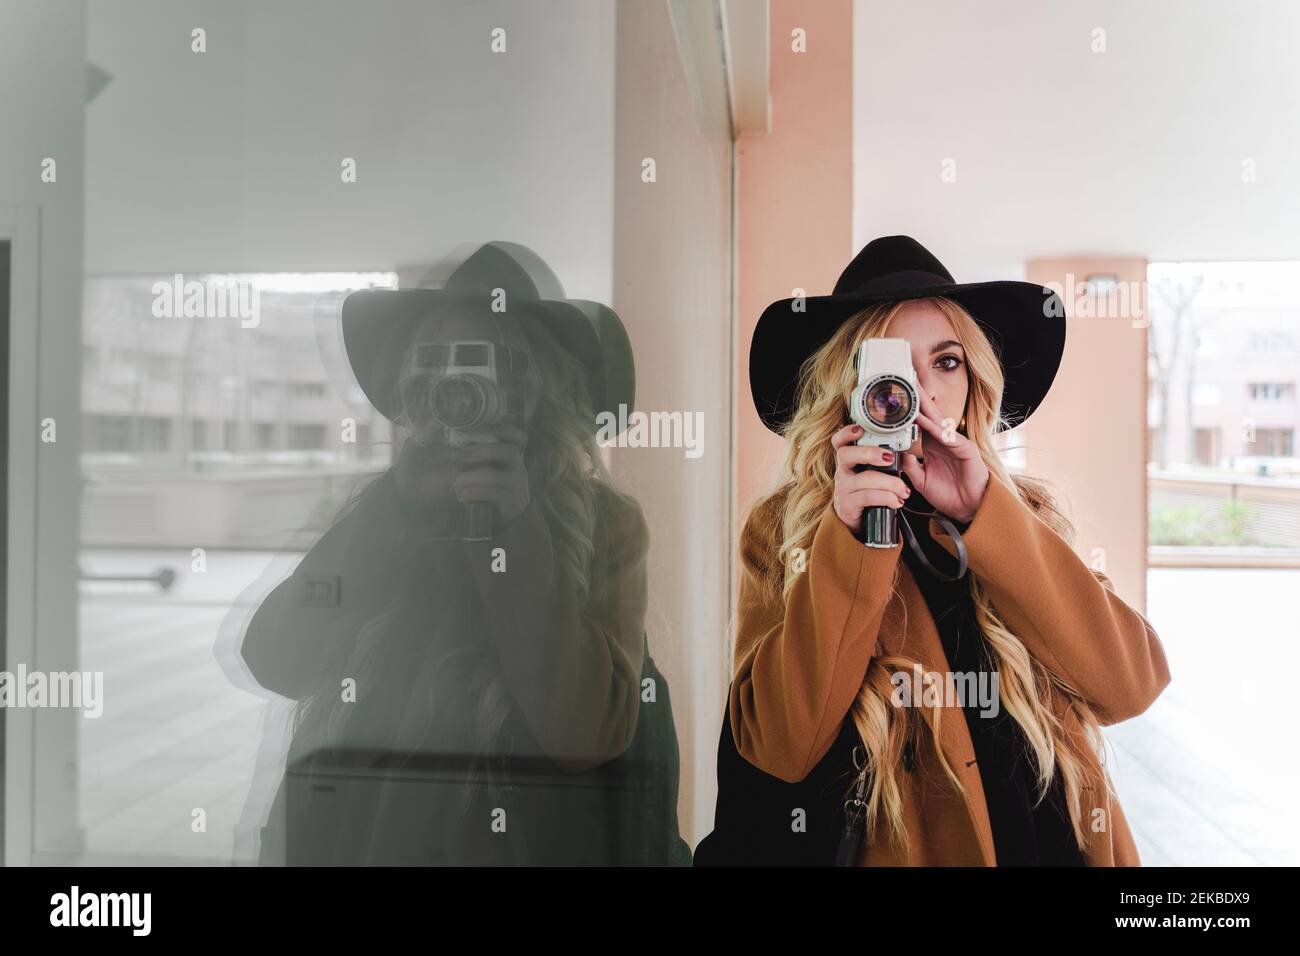 Young woman in hat filming through vintage video camera against reflection in window Stock Photo